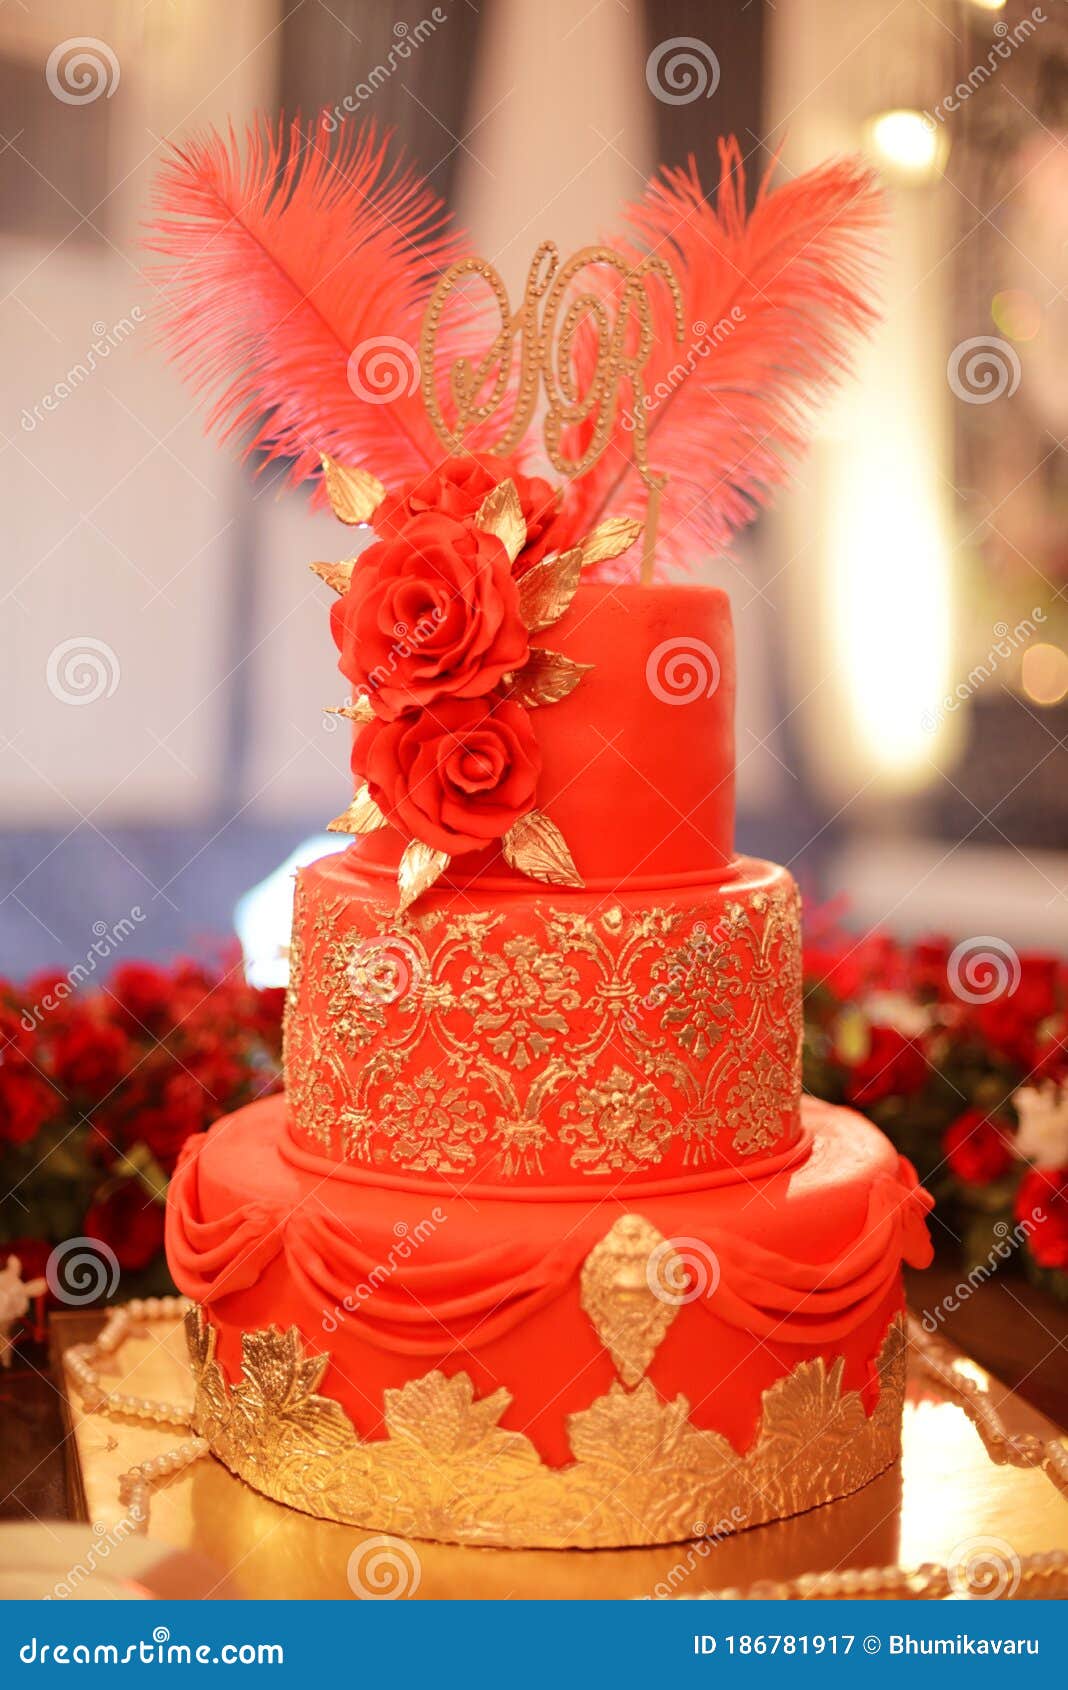 Red Lover Royal Happy Birthday Cake Stock Image - Image of ...